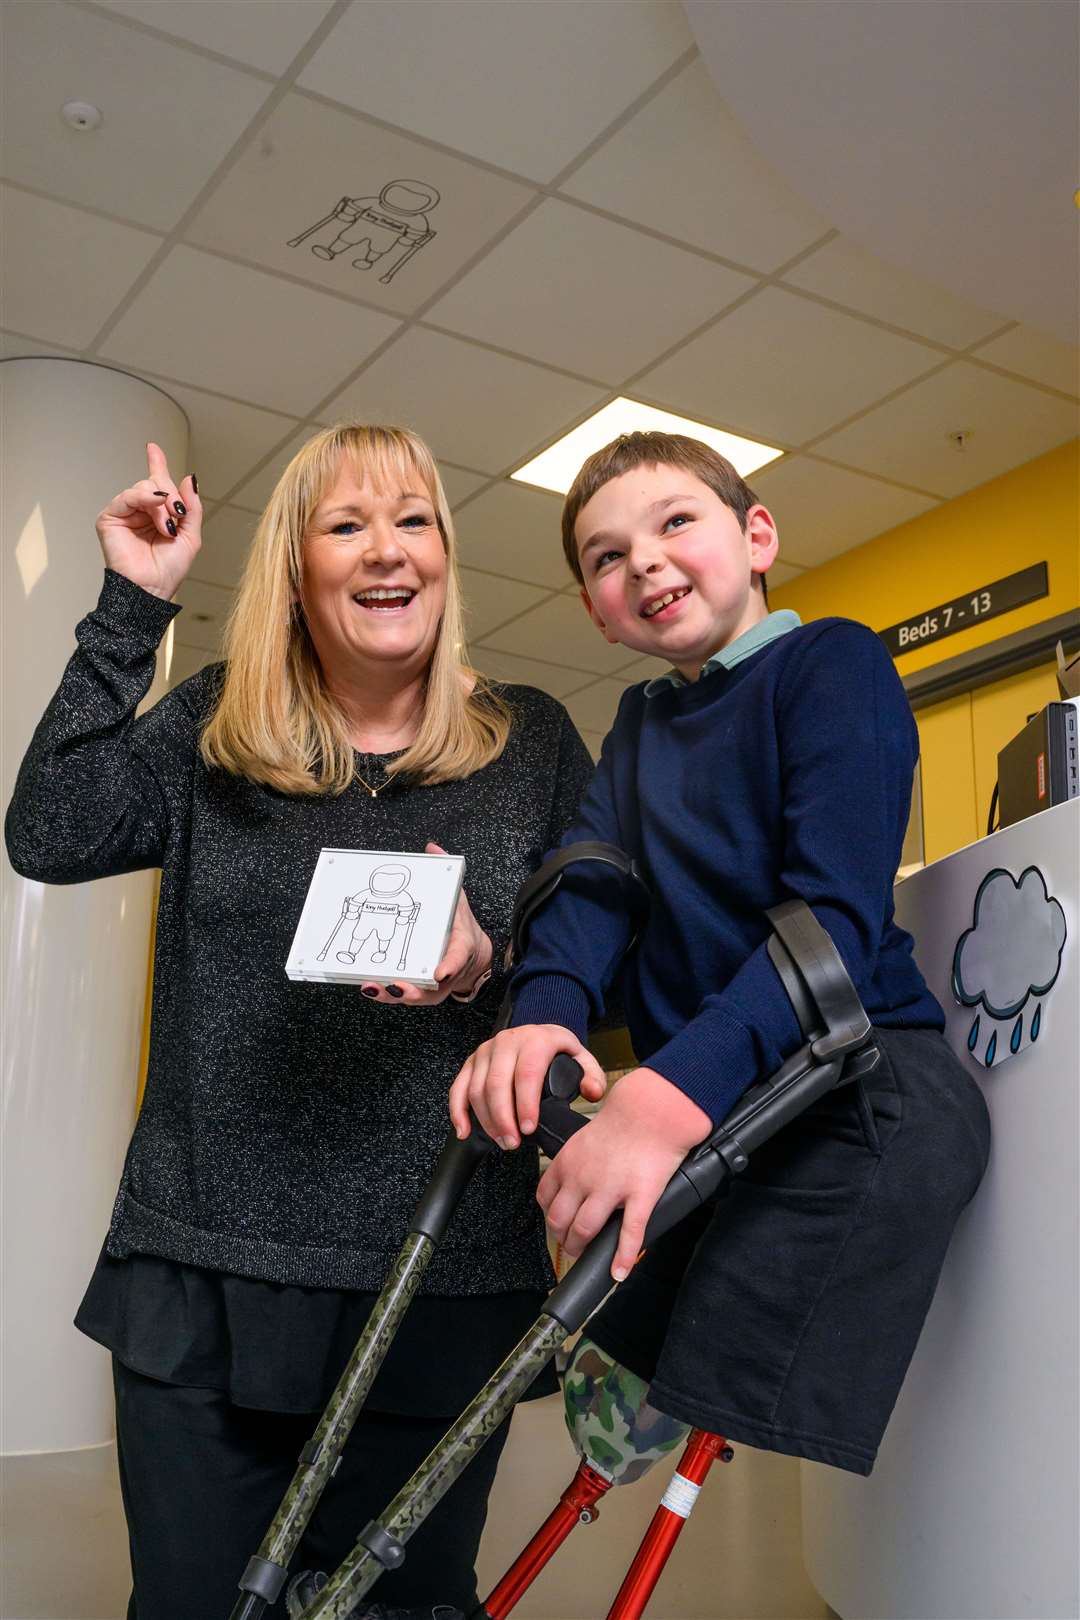 Tony Hudgell, pictured with his mother Paula, has been depicted on a ceiling tile in a new unit at Evelina London Children’s Hospital (David Tett/Guy’s and St Thomas’ NHS Foundation Trust/PA)